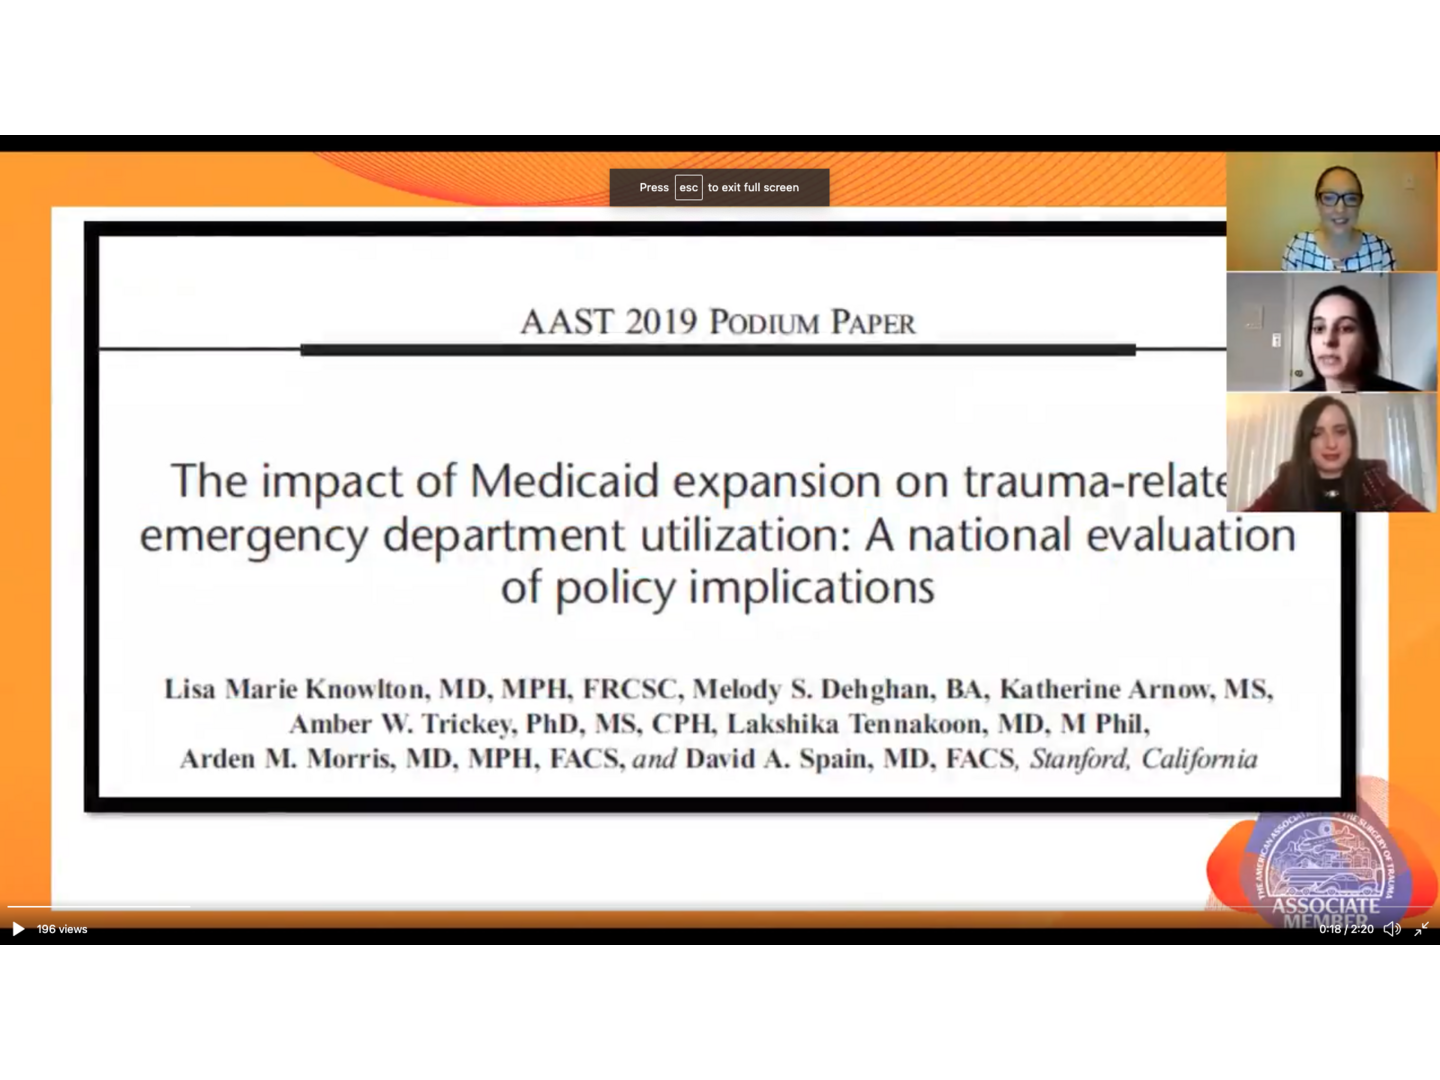 The Impact of Medicaid Expansion on Trauma-related Emergency Department Utilization: A National Evaluation of Policy Implications